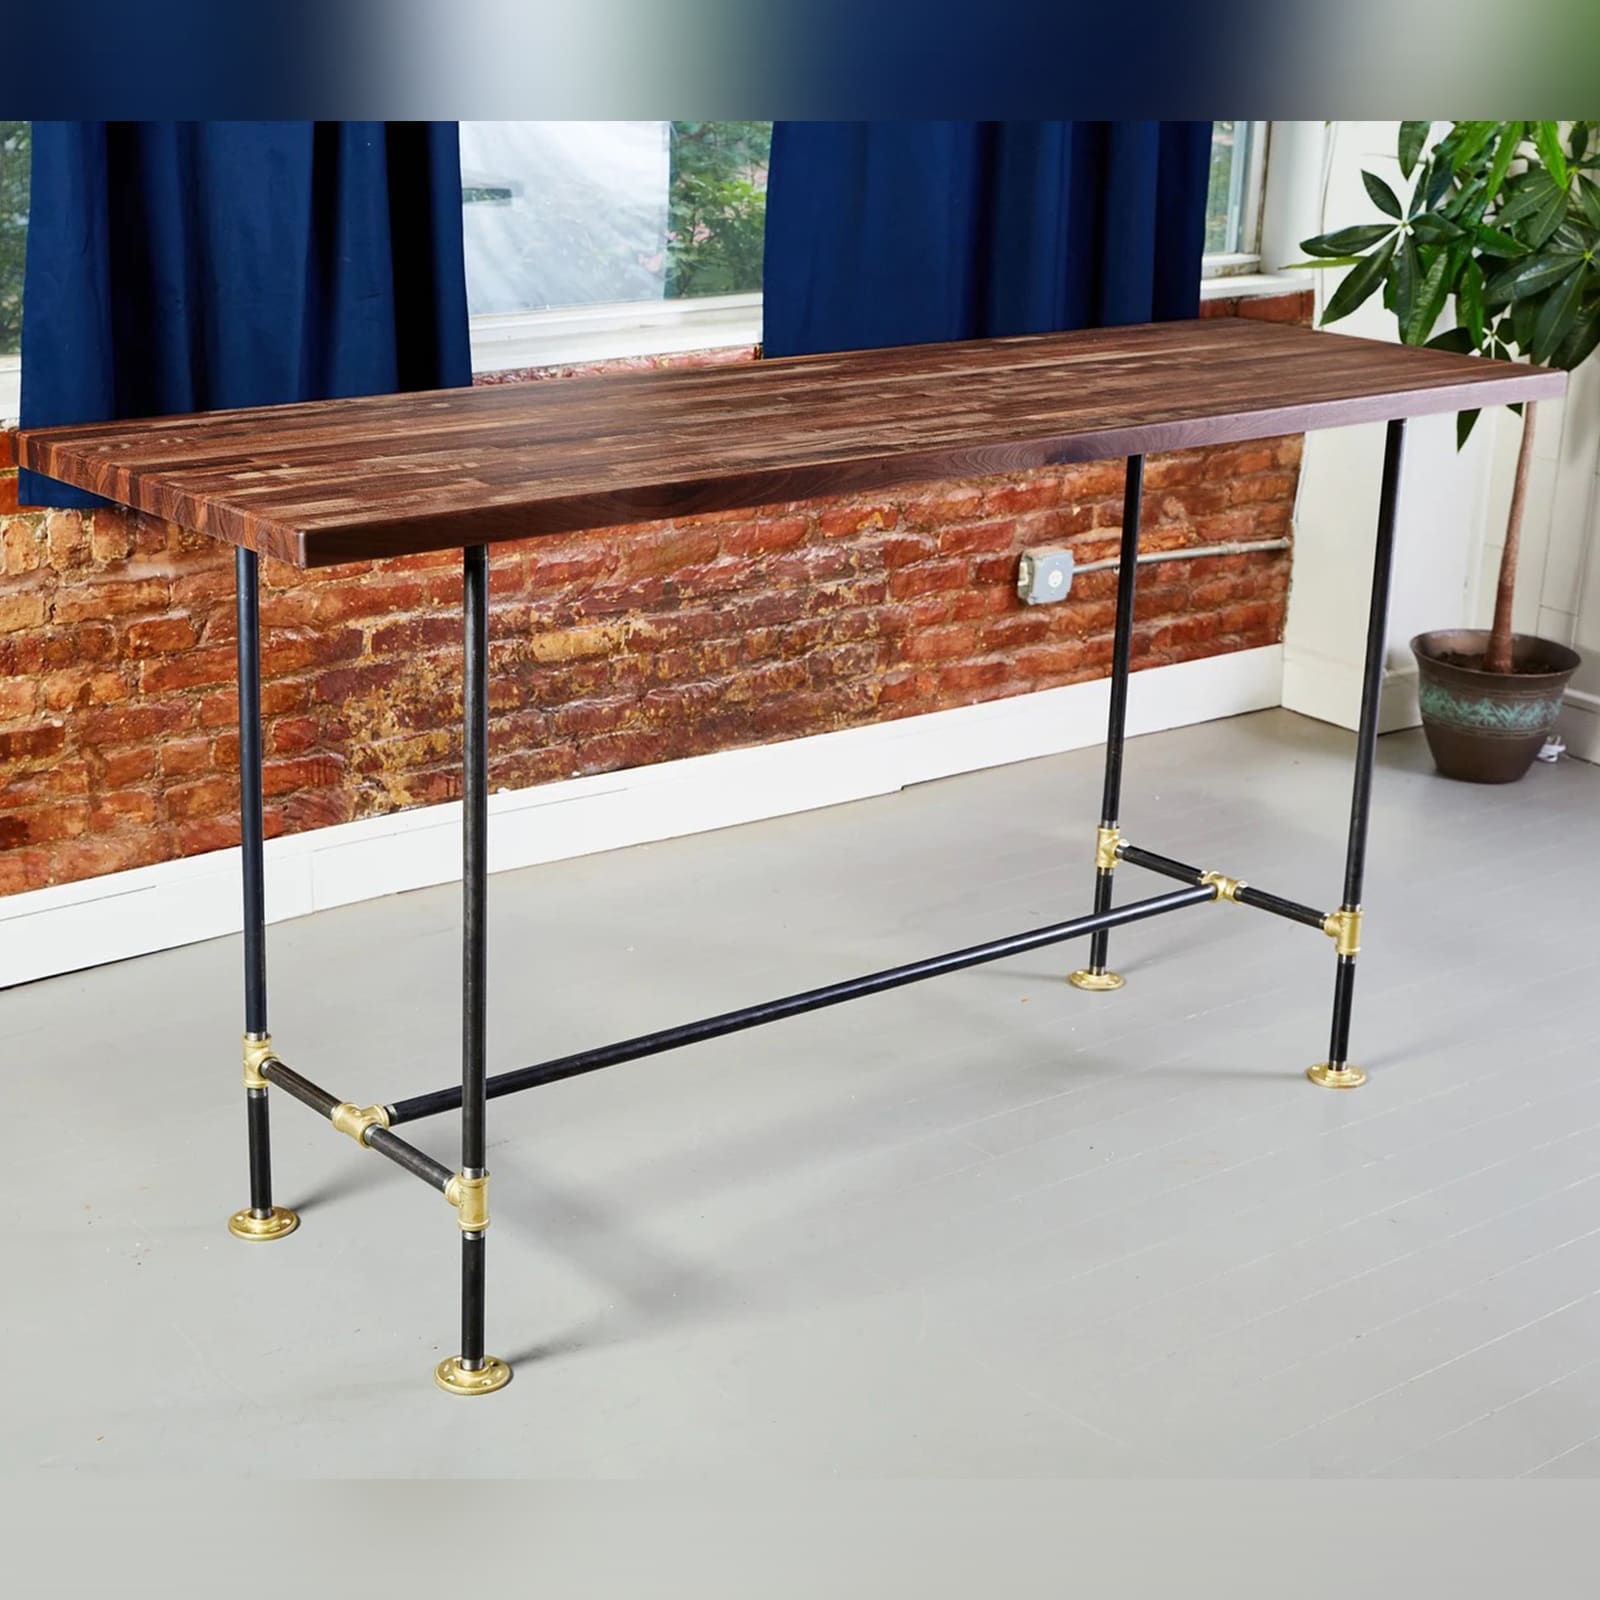 soil & oak standalone desk with black pipe legs and brass fittings and an walnut butcher block table top with leg rest